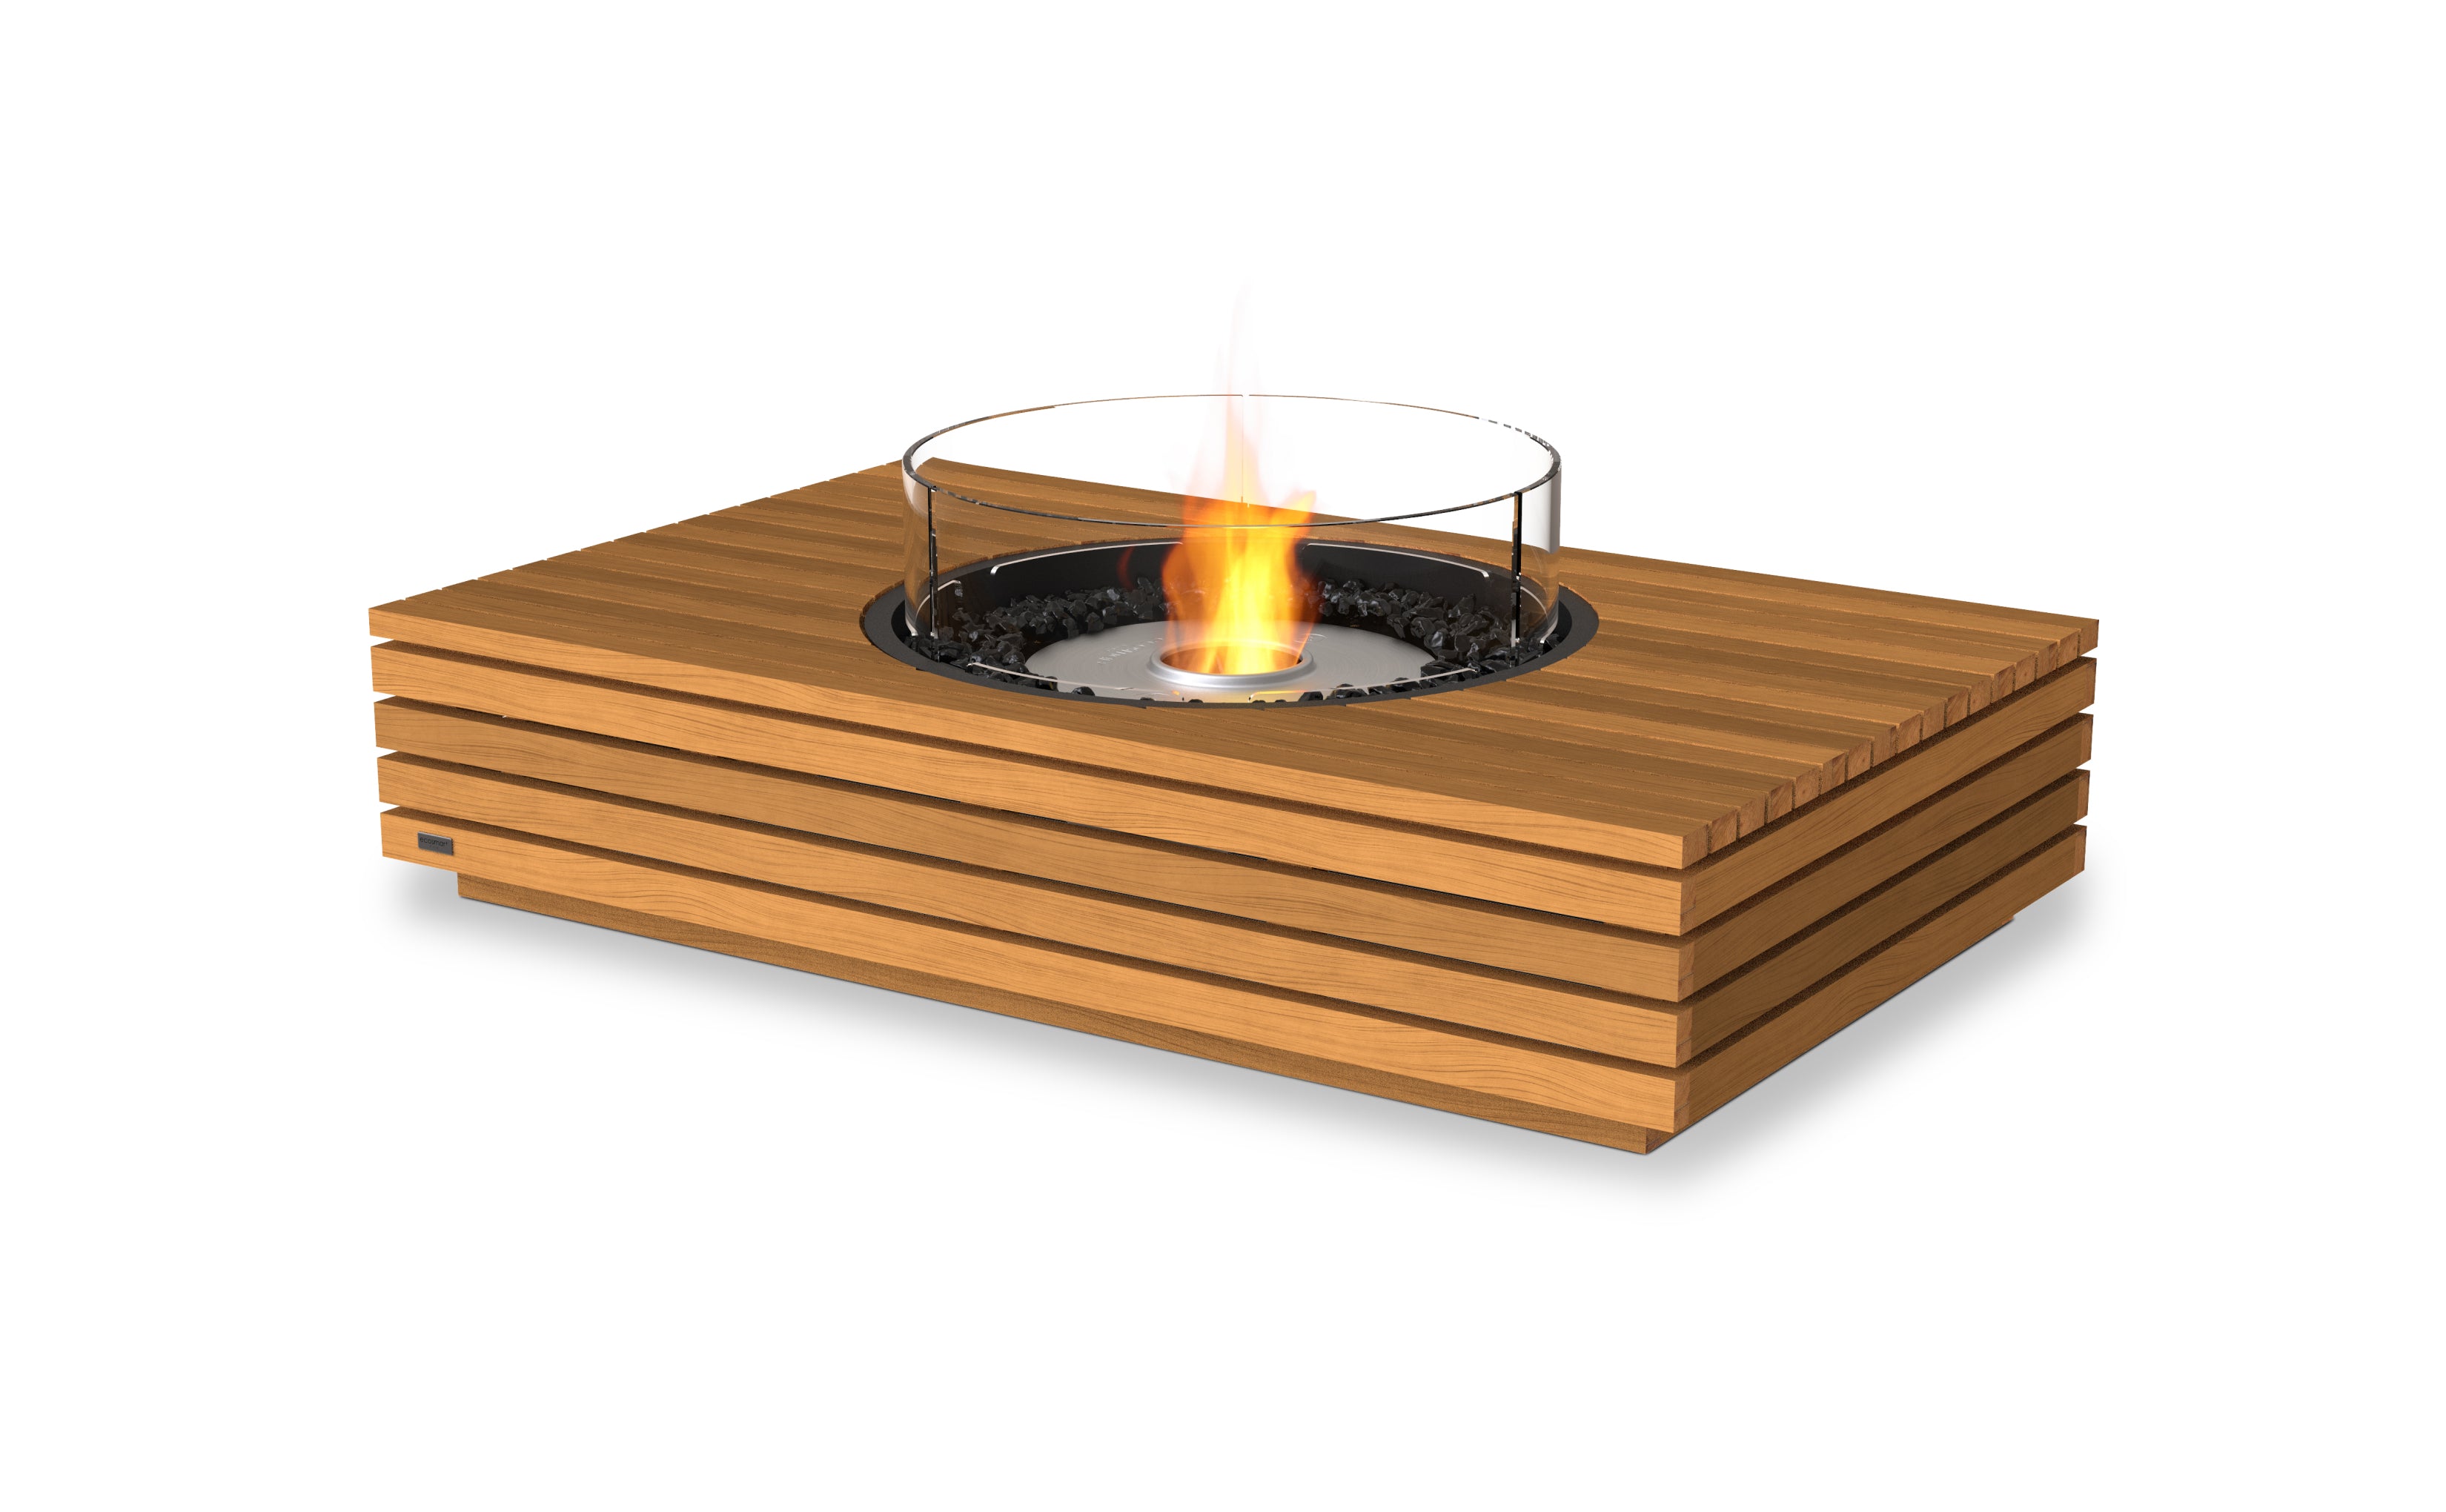 EcoSmart Martini 50 Fire Pit Tables